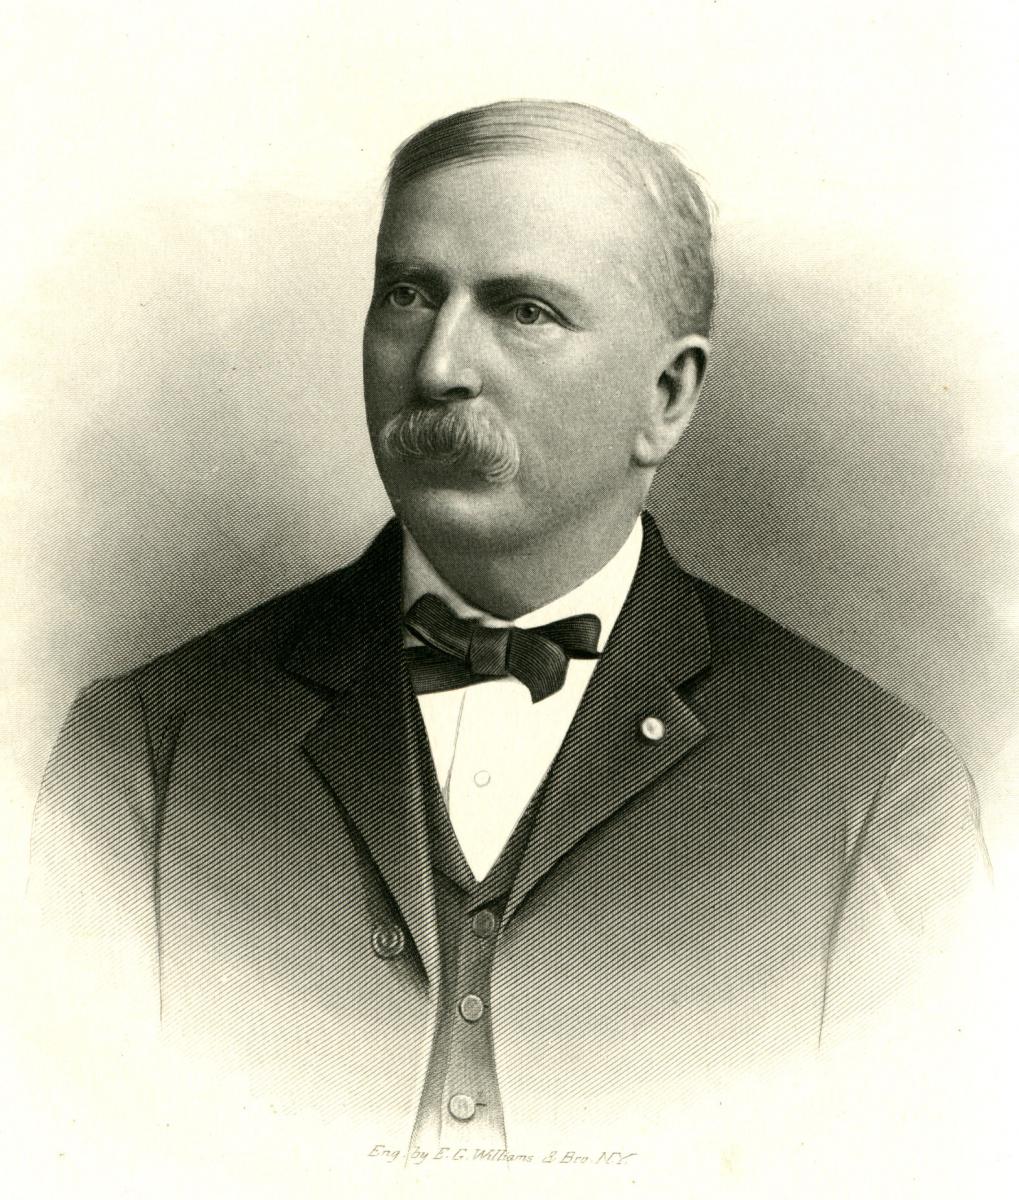 Engraved portrait of Wilson Gray Lamb, from Samuel Ashe's <i>Biographical History of North Carolina</i>, Volume 7, [p. 280-281], published 1908 by Charles L. Van Noppen Publisher, Greensboro, North Carolina.  From the collections of the Government & Heritage Library, State Library of North Carolina. 